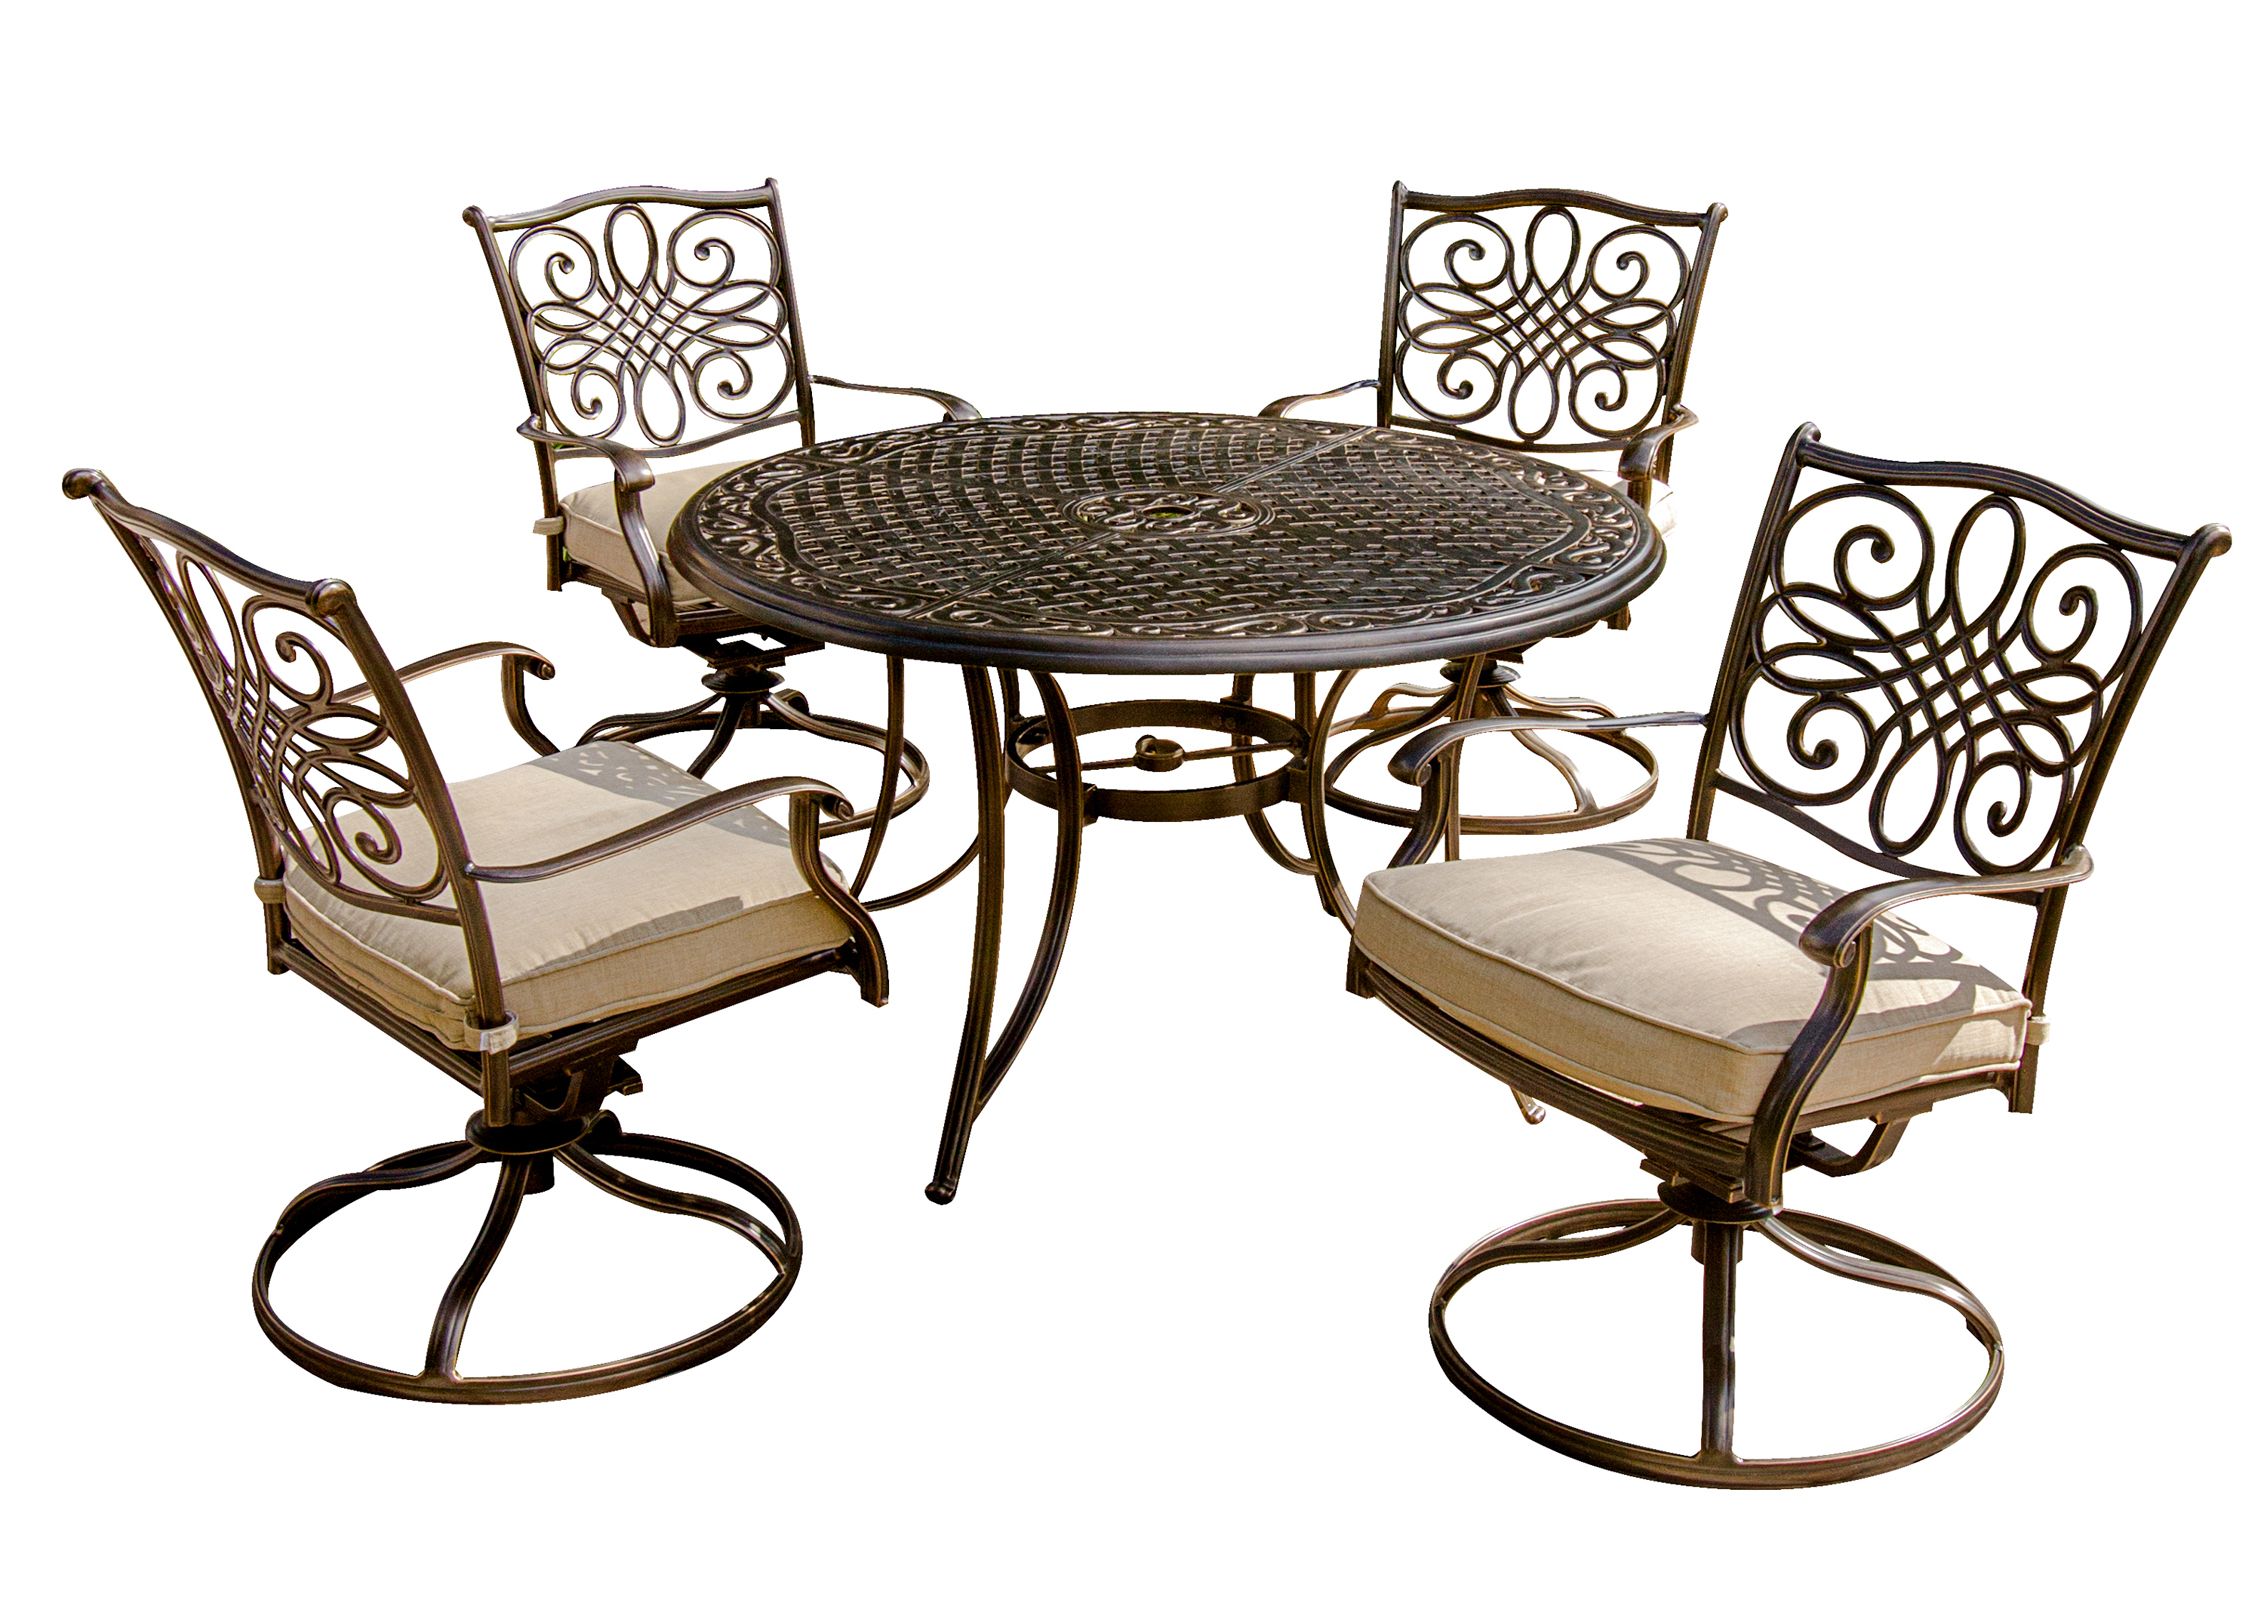 Hanover Traditions 5-Piece Patio Dining Set with 4 Swivel Rocker Chairs with Tan Cushions and 48" Round Cast Dining Table, Patio Dining Set for 4, Premium Weather Resistant Outdoor Furniture - image 1 of 17